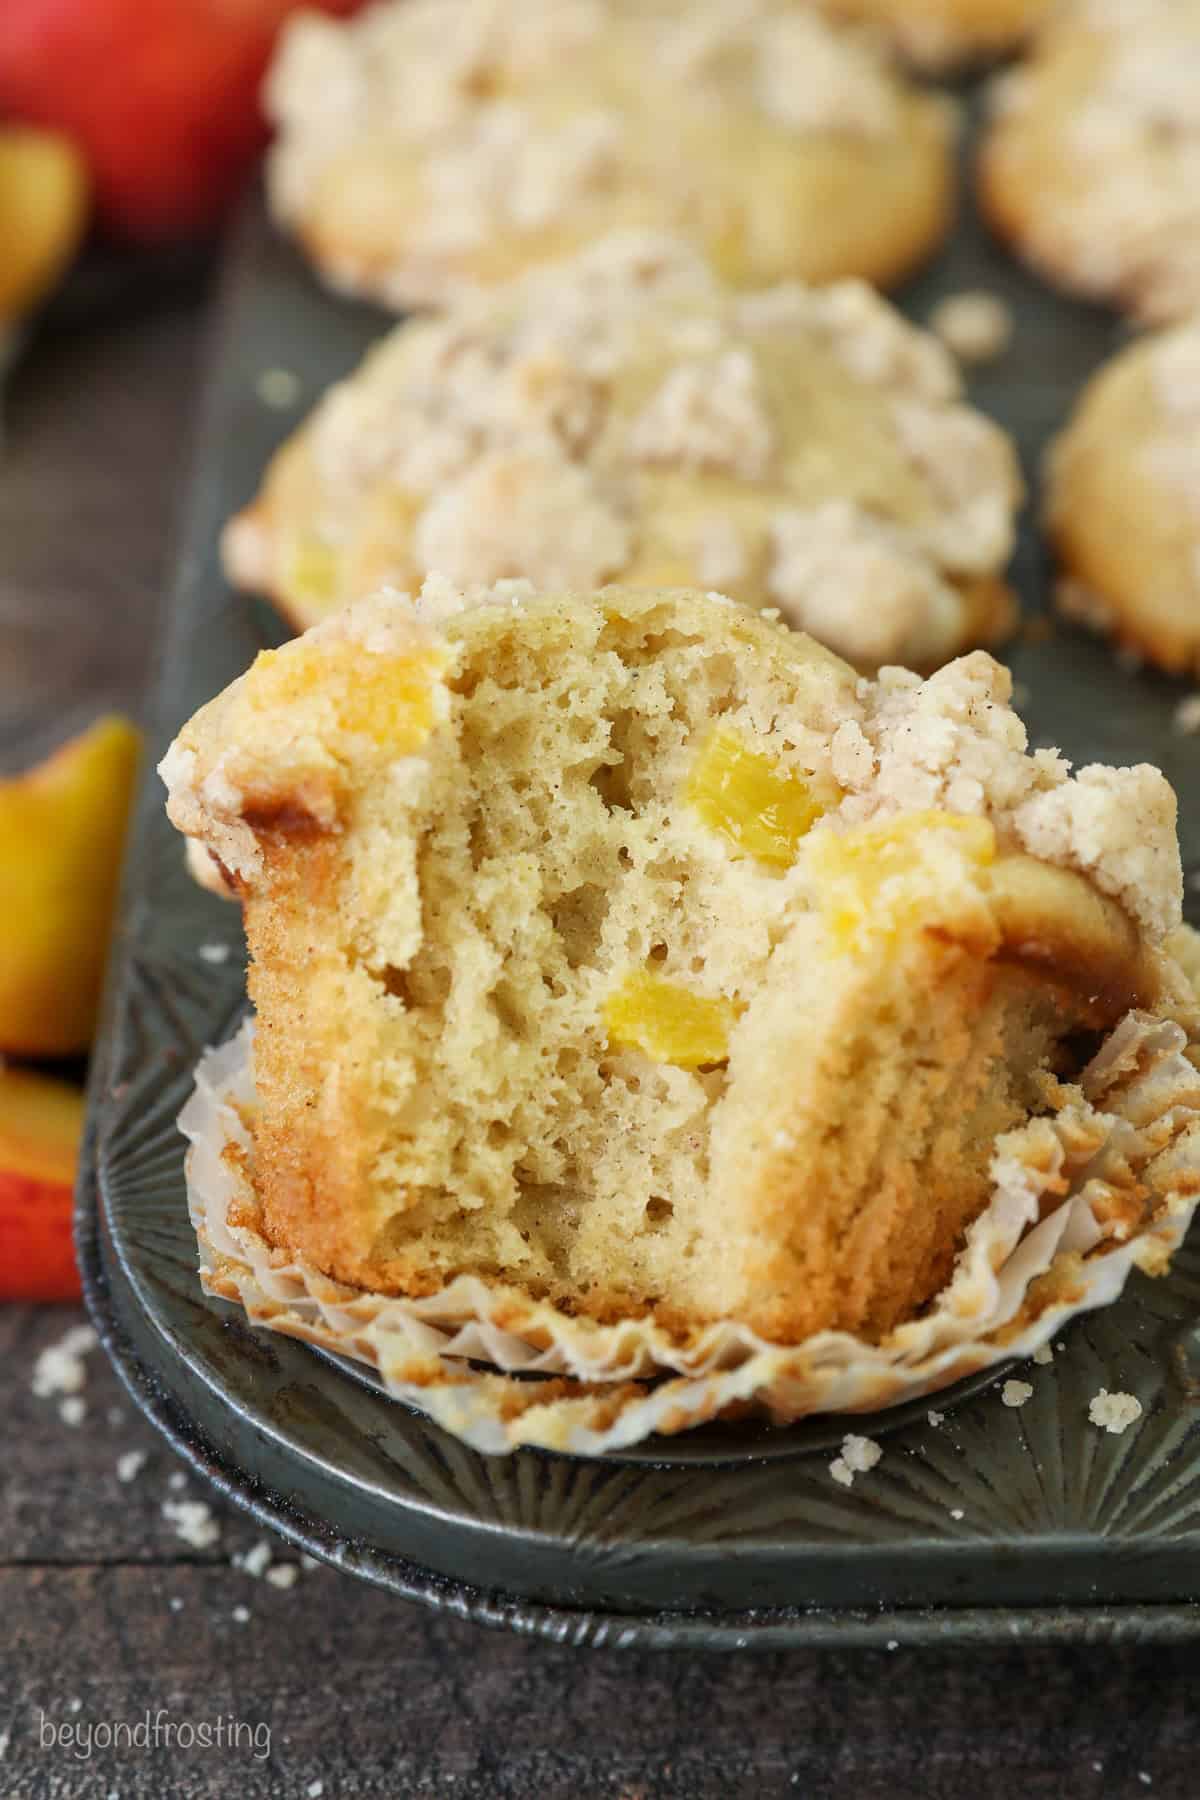 A peach macadamia nut muffin with a bite missing resting in the well of a muffin tin, with more muffins in the background.